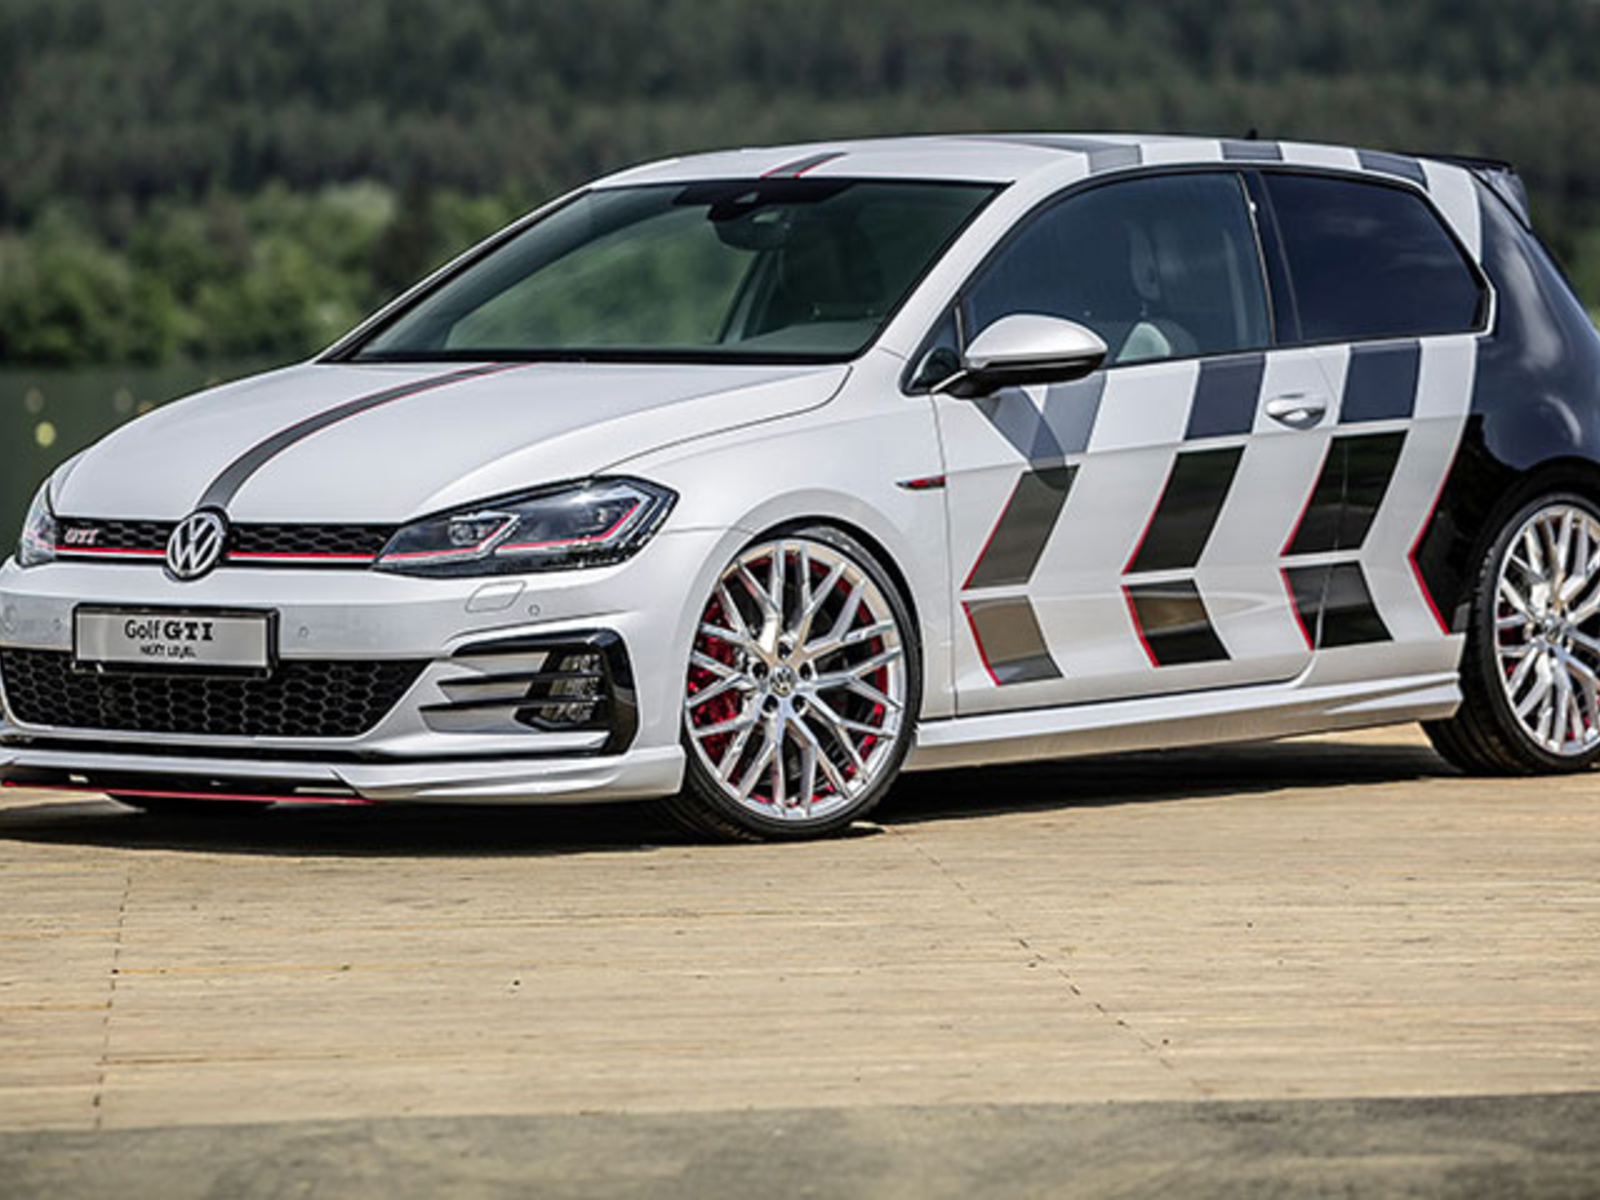 VW zeigt Golf GTI Next Level mit 411 PS - oe24.at